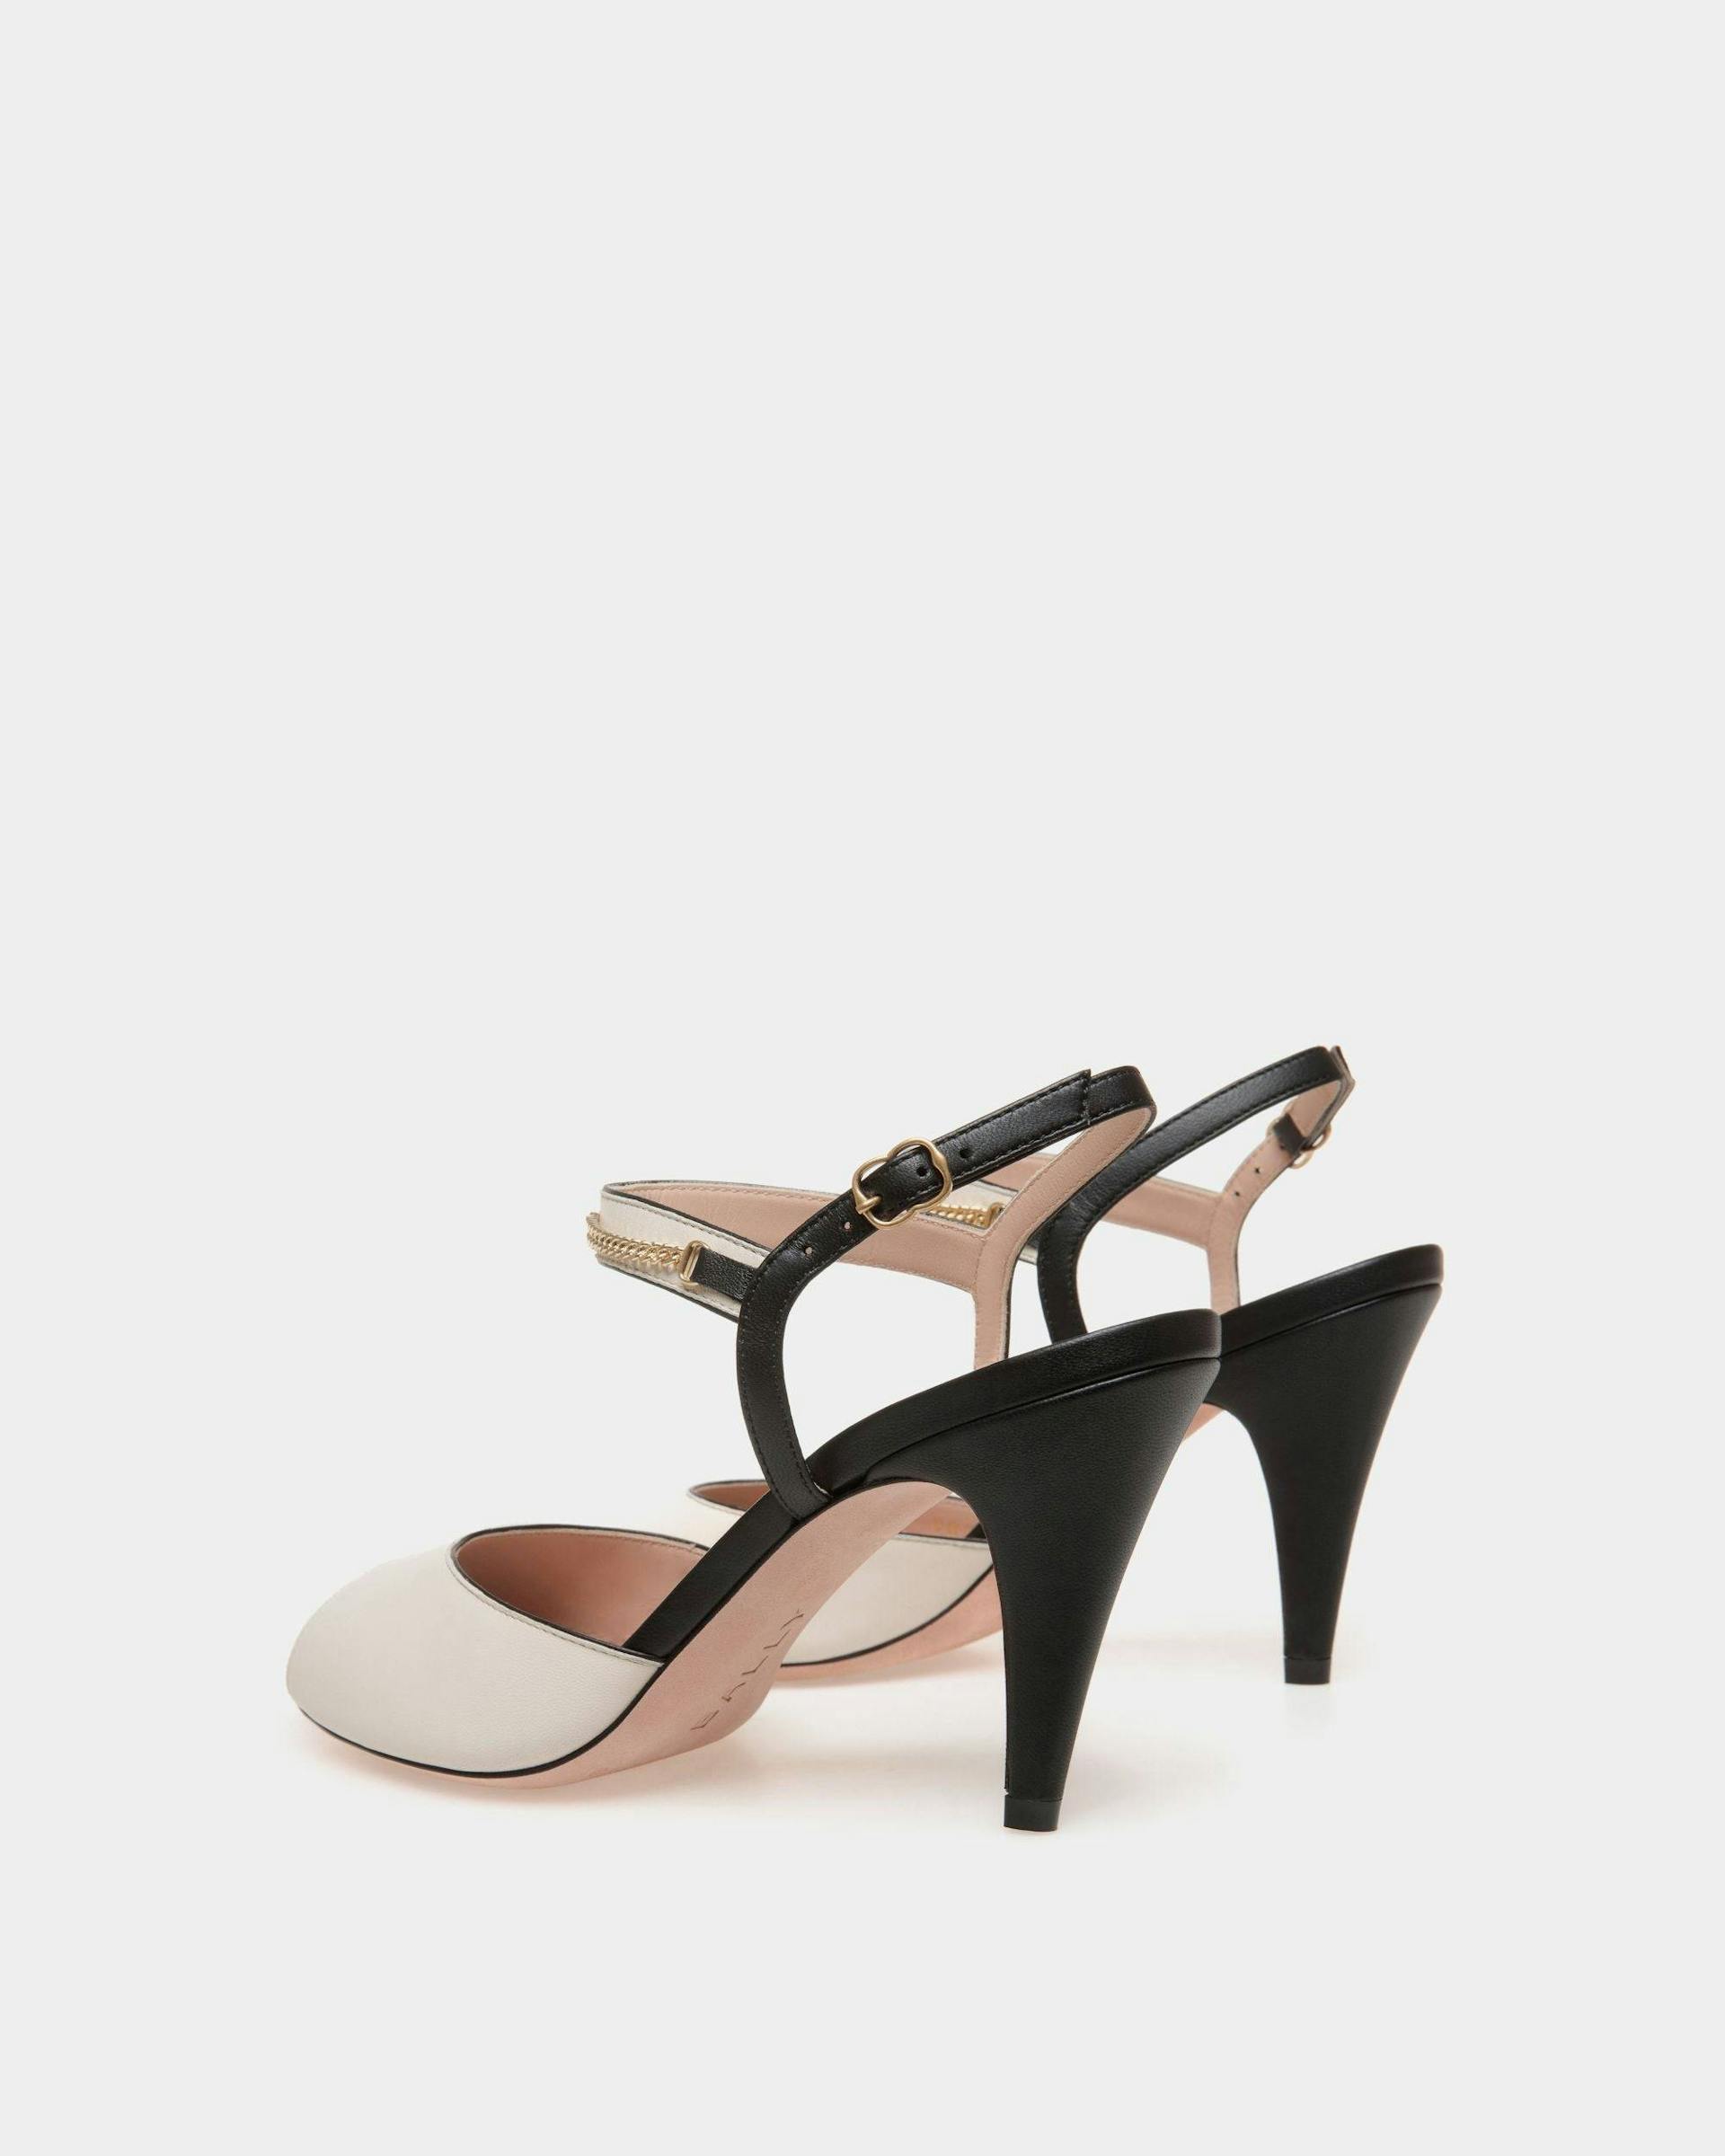 Women's Daily Emblem Heeled Sandal in Black and White Leather | Bally | Still Life 3/4 Back